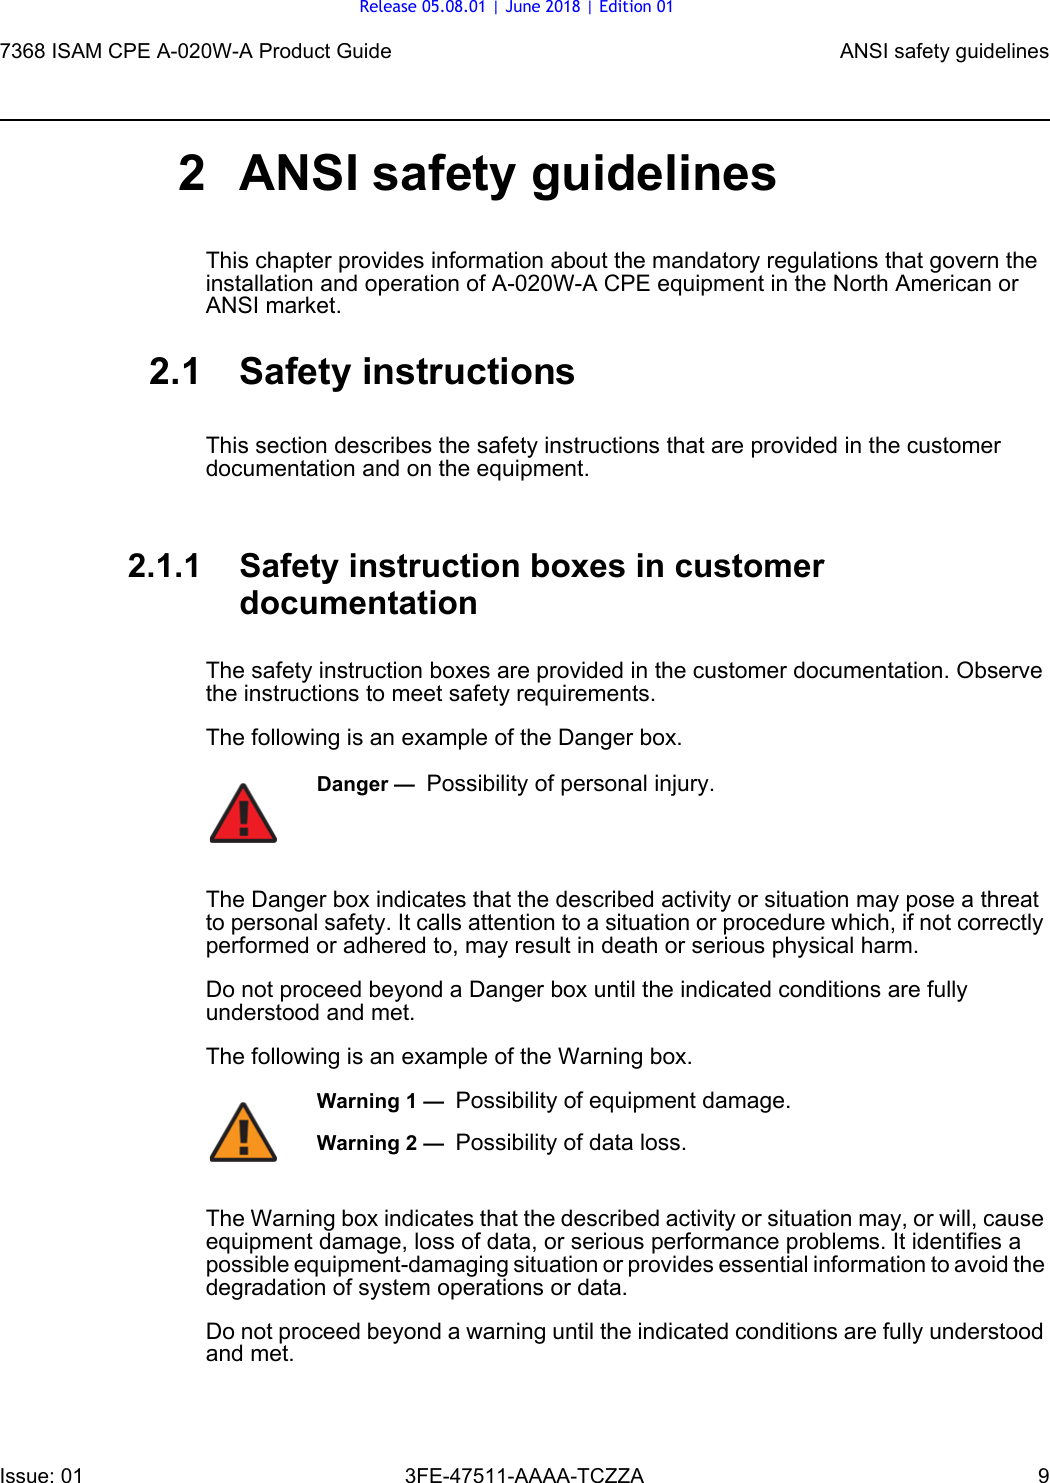 7368 ISAM CPE A-020W-A Product Guide ANSI safety guidelinesIssue: 01 3FE-47511-AAAA-TCZZA 9 2 ANSI safety guidelinesThis chapter provides information about the mandatory regulations that govern the installation and operation of A-020W-A CPE equipment in the North American or ANSI market.2.1 Safety instructionsThis section describes the safety instructions that are provided in the customer documentation and on the equipment.2.1.1 Safety instruction boxes in customer documentationThe safety instruction boxes are provided in the customer documentation. Observe the instructions to meet safety requirements.The following is an example of the Danger box.The Danger box indicates that the described activity or situation may pose a threat to personal safety. It calls attention to a situation or procedure which, if not correctly performed or adhered to, may result in death or serious physical harm. Do not proceed beyond a Danger box until the indicated conditions are fully understood and met.The following is an example of the Warning box.The Warning box indicates that the described activity or situation may, or will, cause equipment damage, loss of data, or serious performance problems. It identifies a possible equipment-damaging situation or provides essential information to avoid the degradation of system operations or data.Do not proceed beyond a warning until the indicated conditions are fully understood and met.Danger —  Possibility of personal injury. Warning 1 —  Possibility of equipment damage.Warning 2 —  Possibility of data loss.Release 05.08.01 | June 2018 | Edition 01